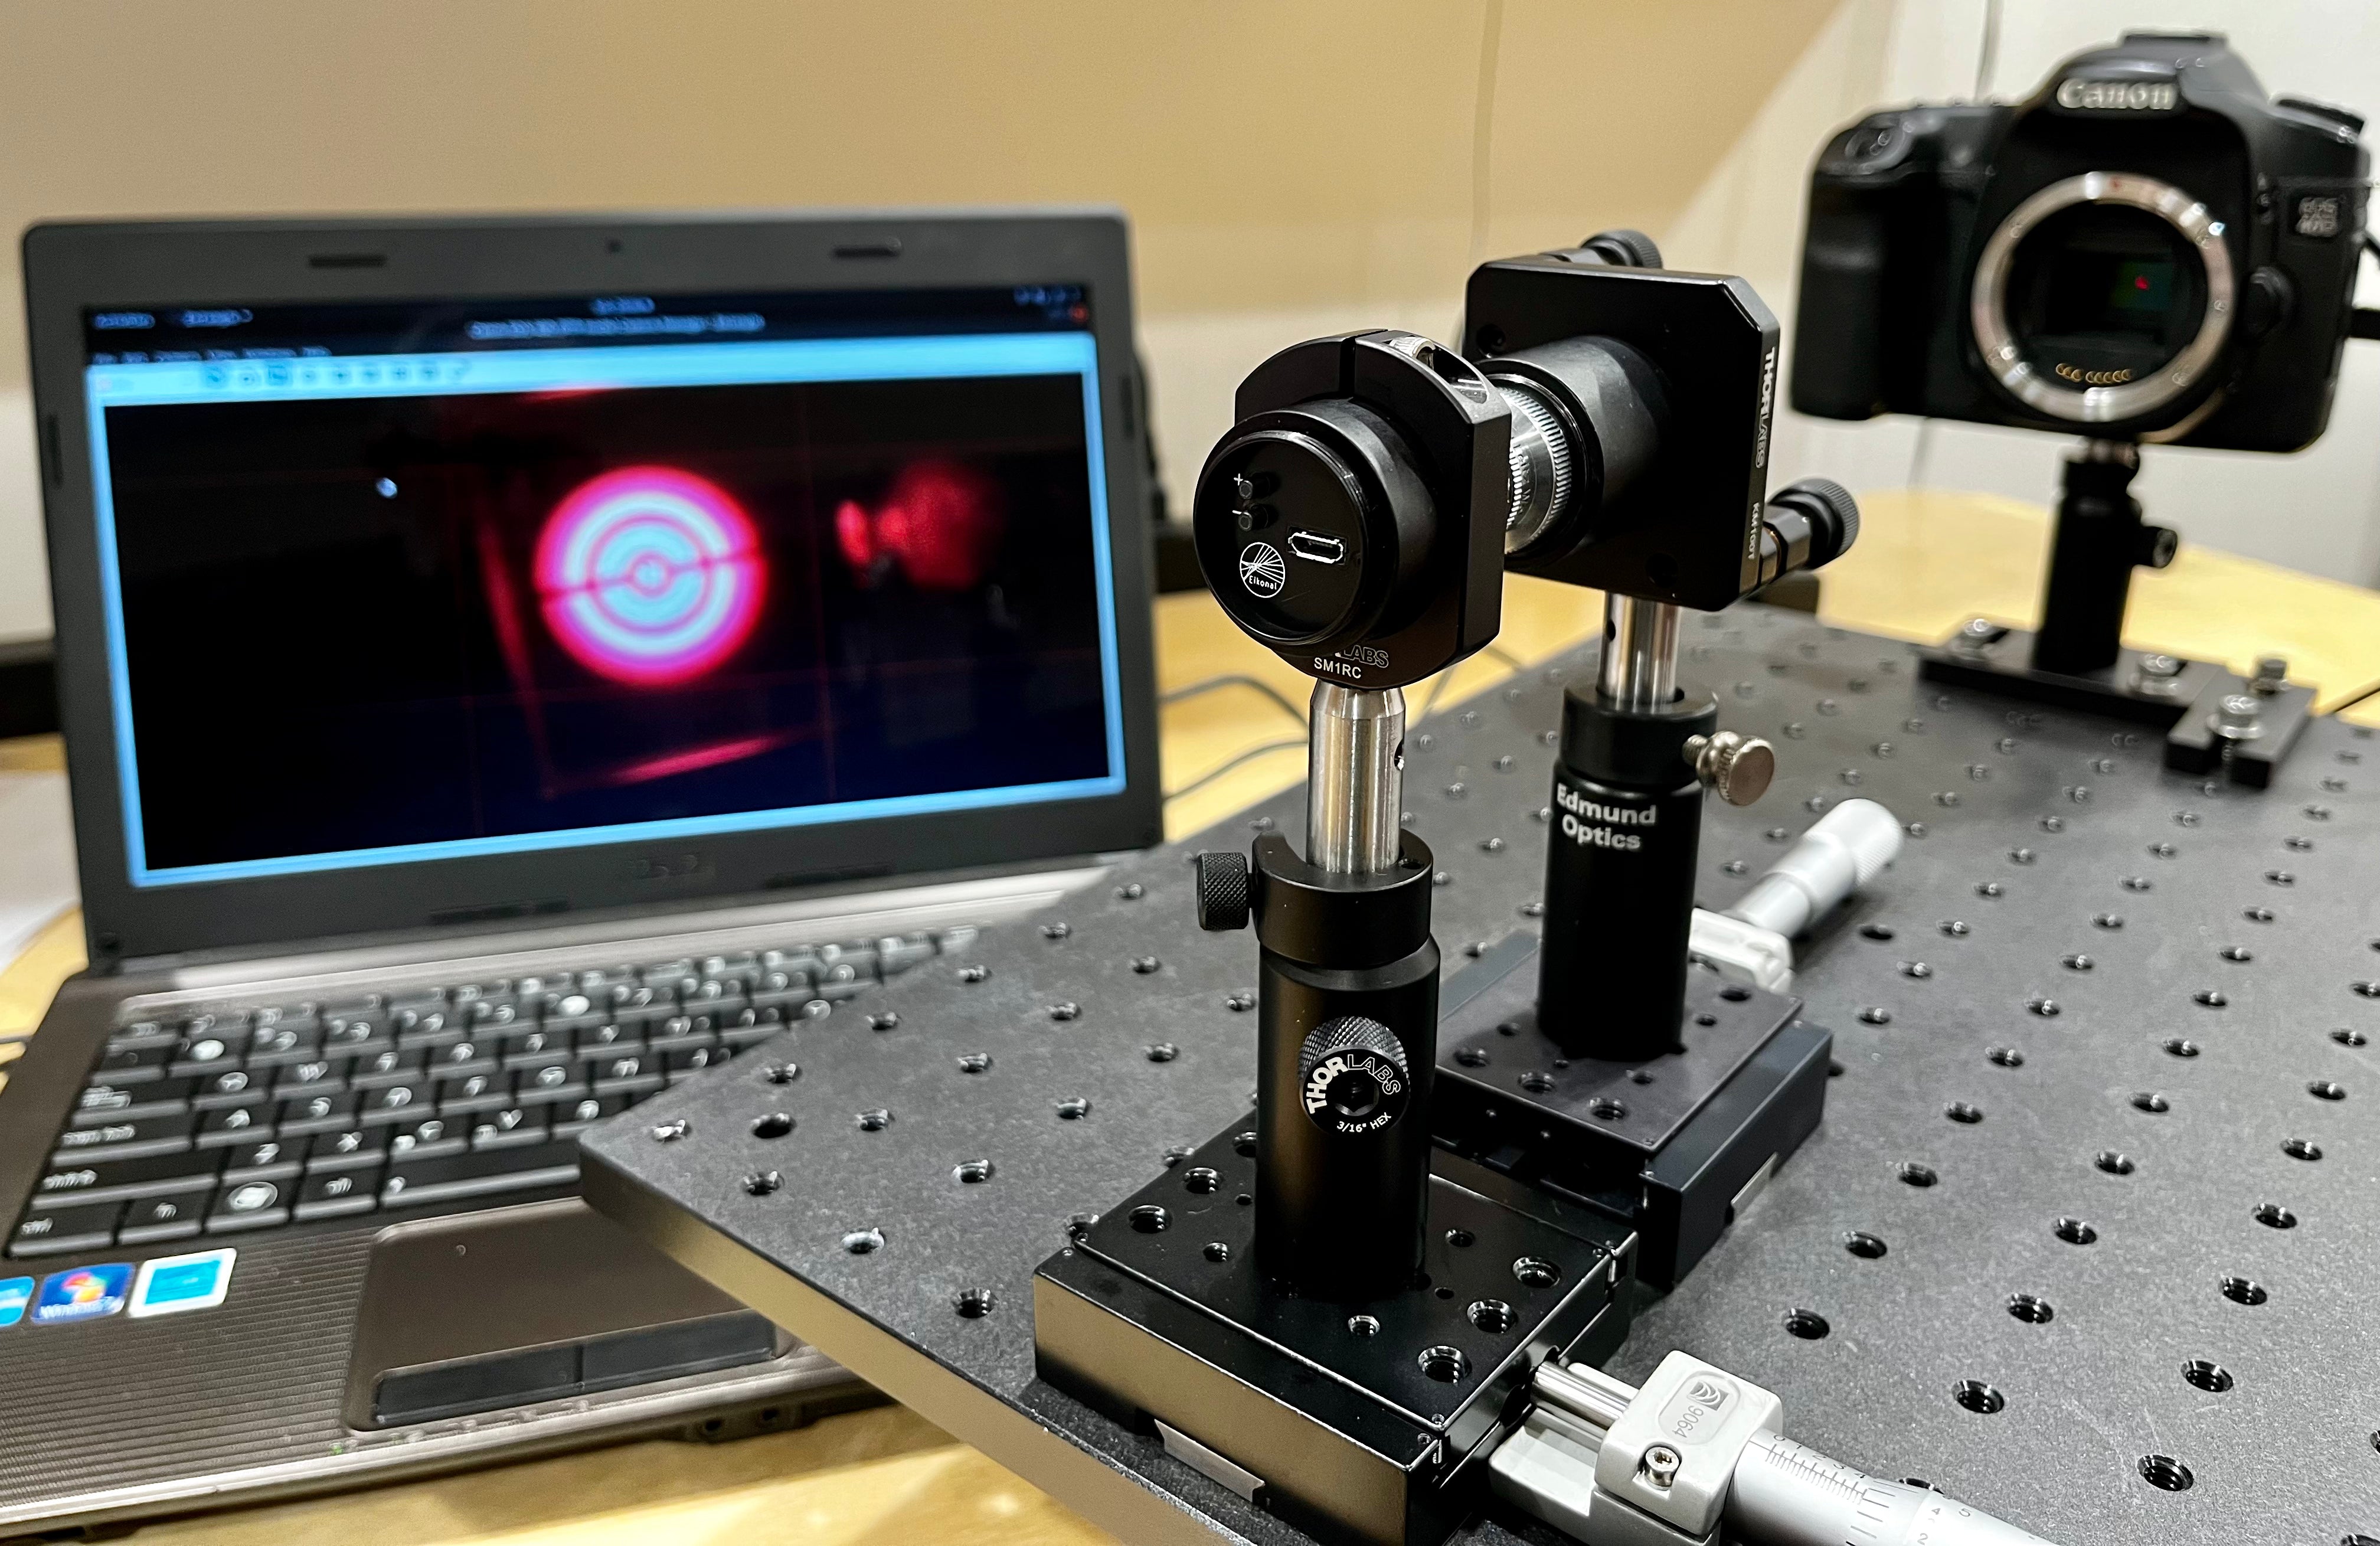 Imaging of point-emitter LED (LED-01) showing the 50 micron active area using an NA=0.4 microscope objective and a DSLR.